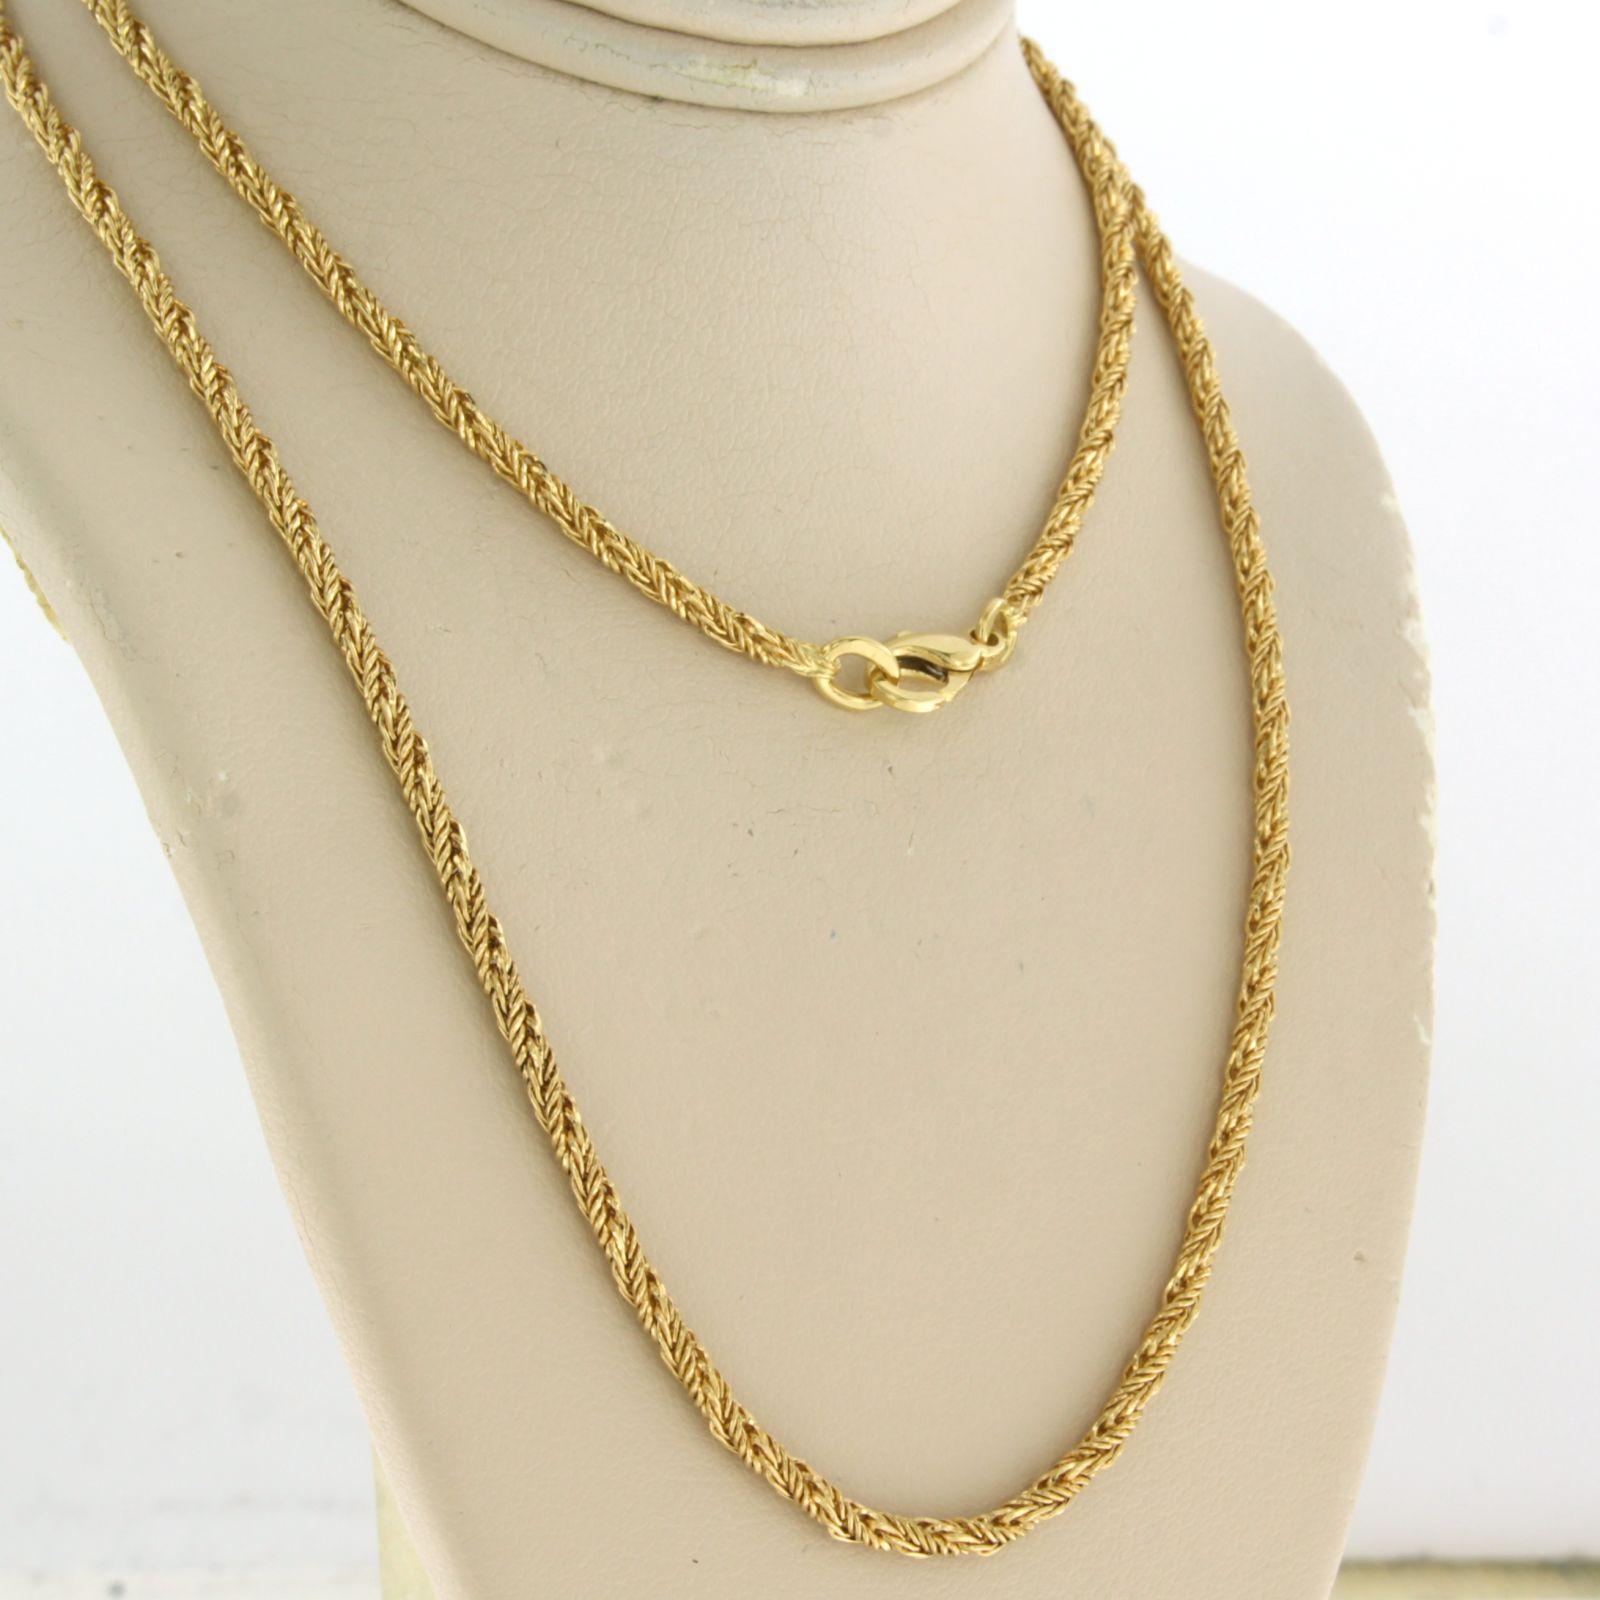 Necklace 18k yellow gold 45 cm long In Good Condition For Sale In The Hague, ZH